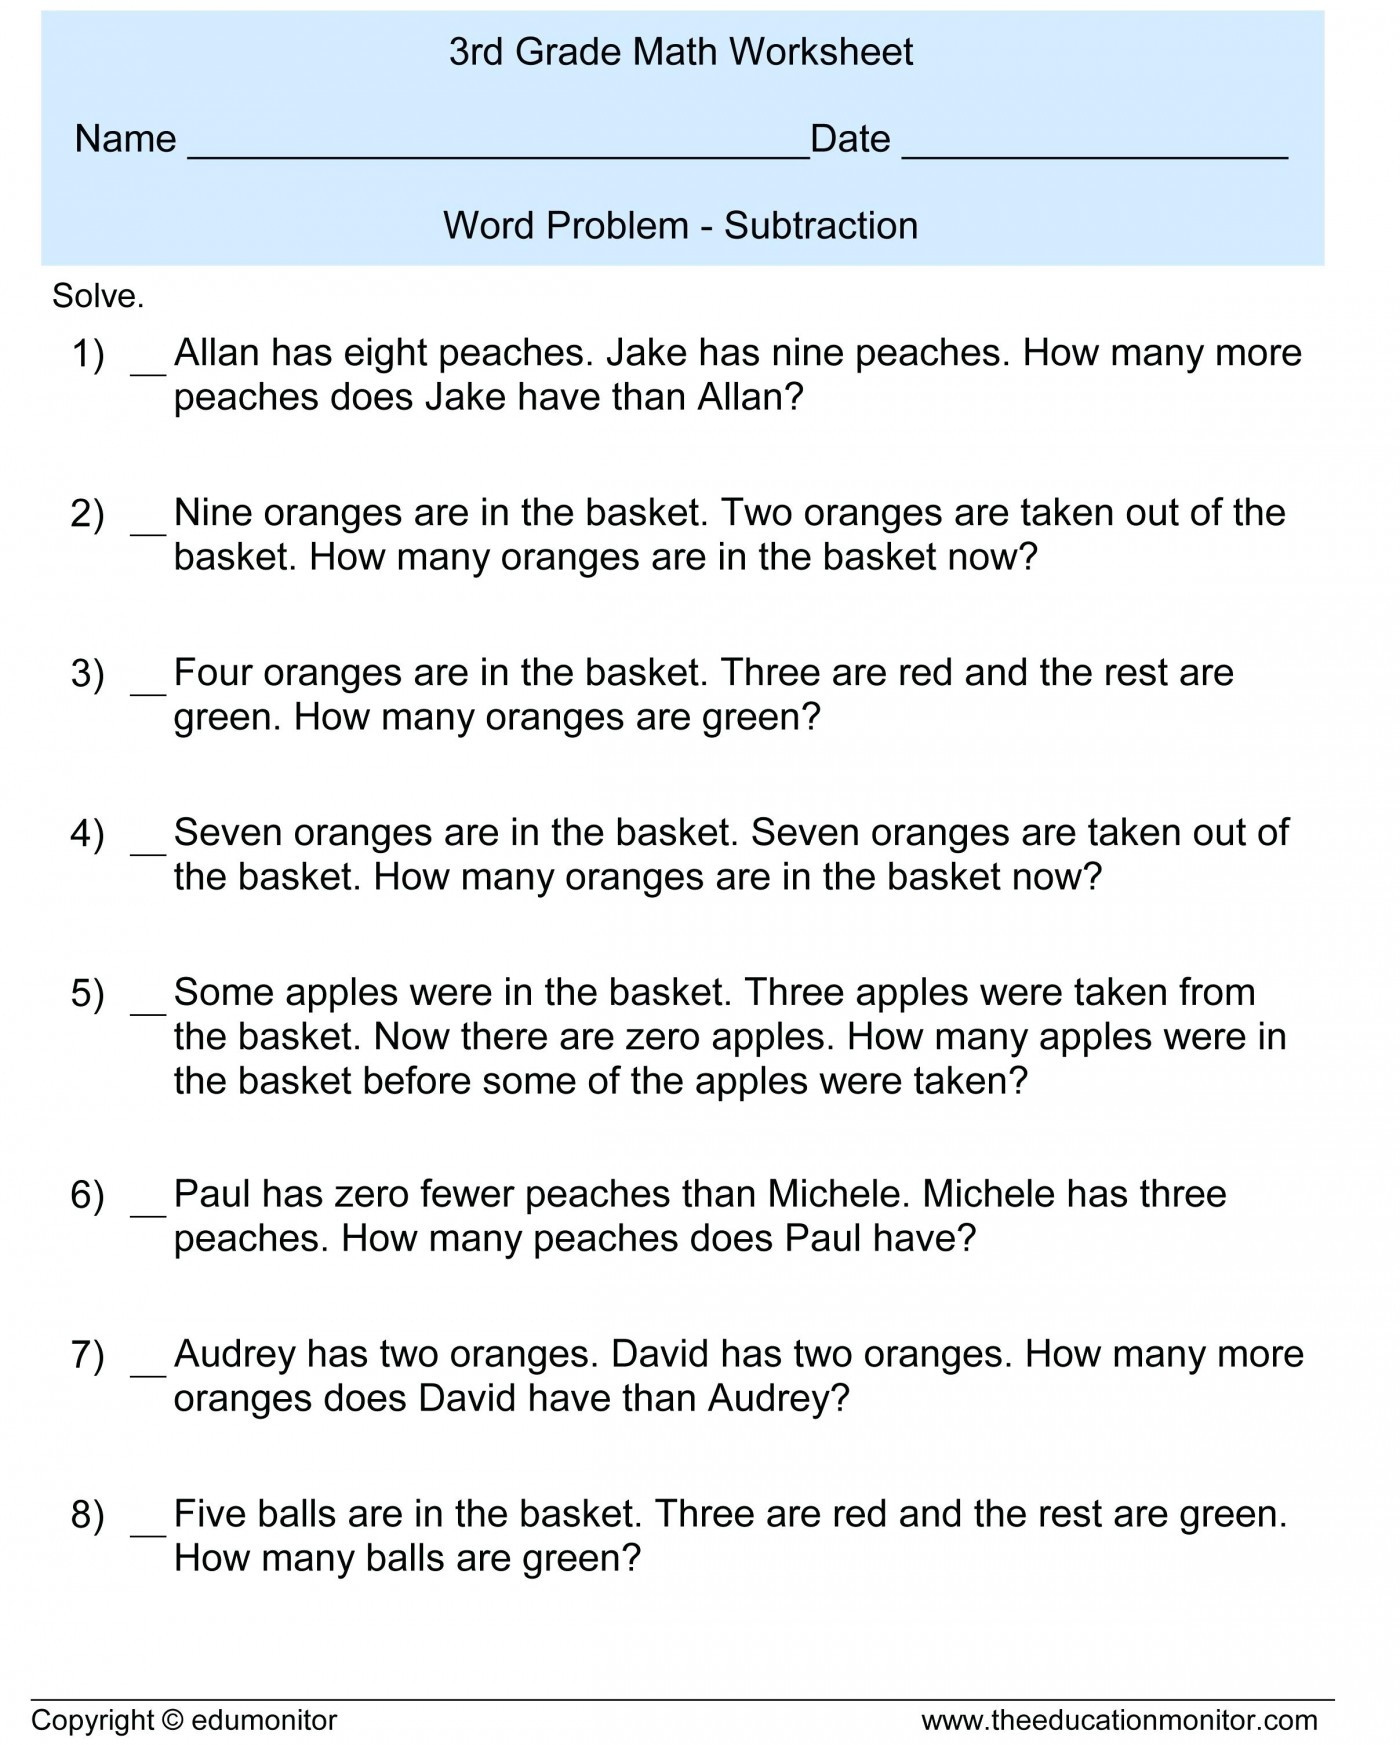 Free Math Worksheets Second Grade 2 Subtraction Add and Subtract 3 Single Digit Numbers